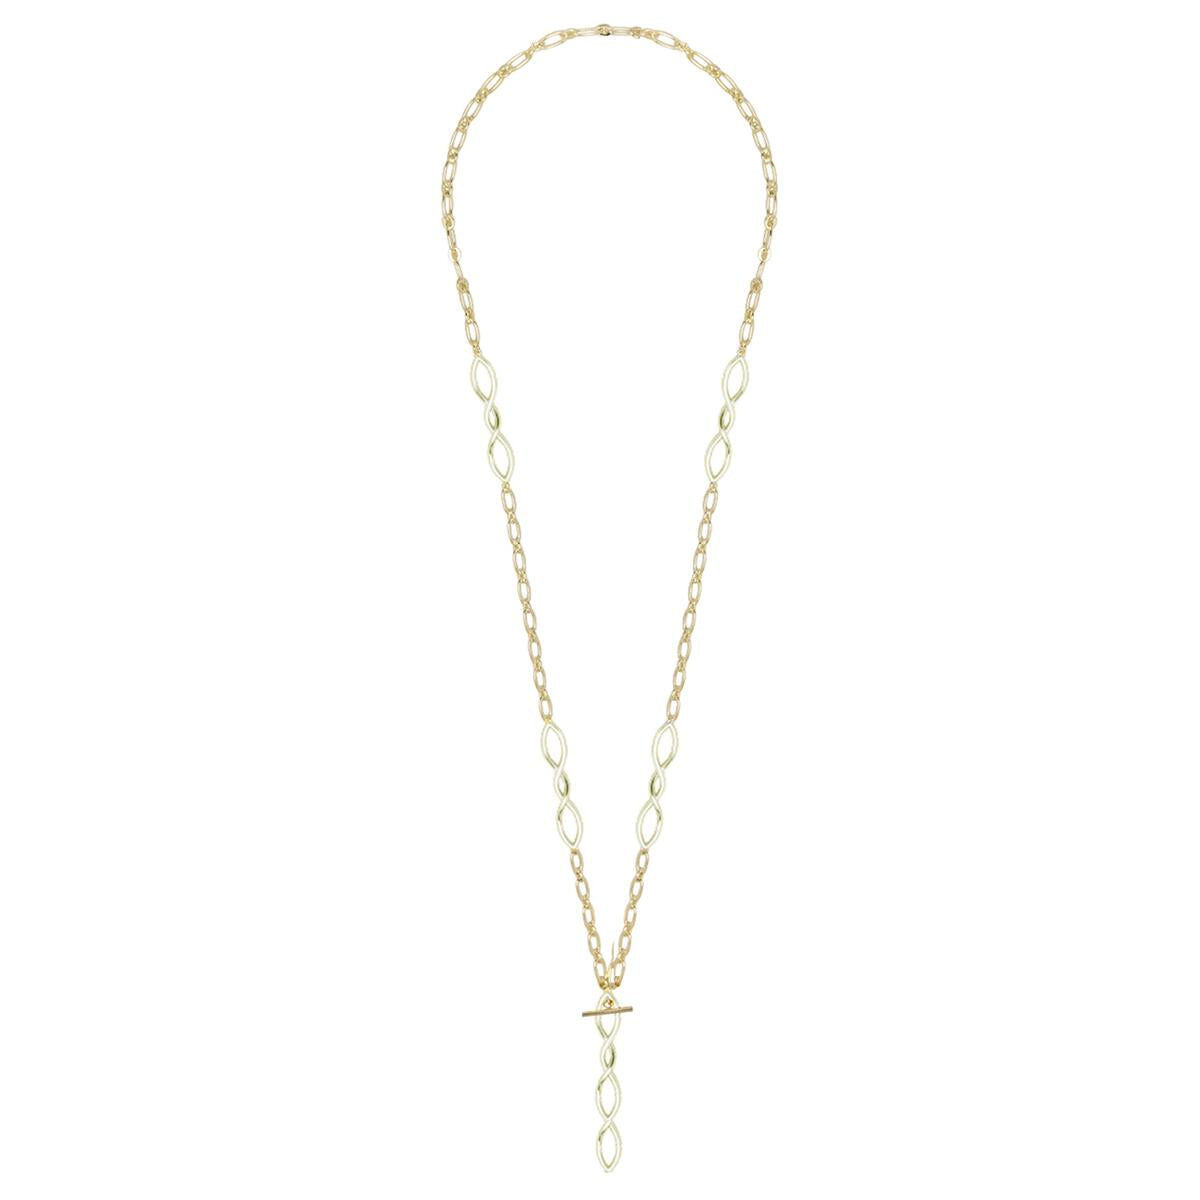 Natalie Wood Designs - Blossom Toggle Necklace